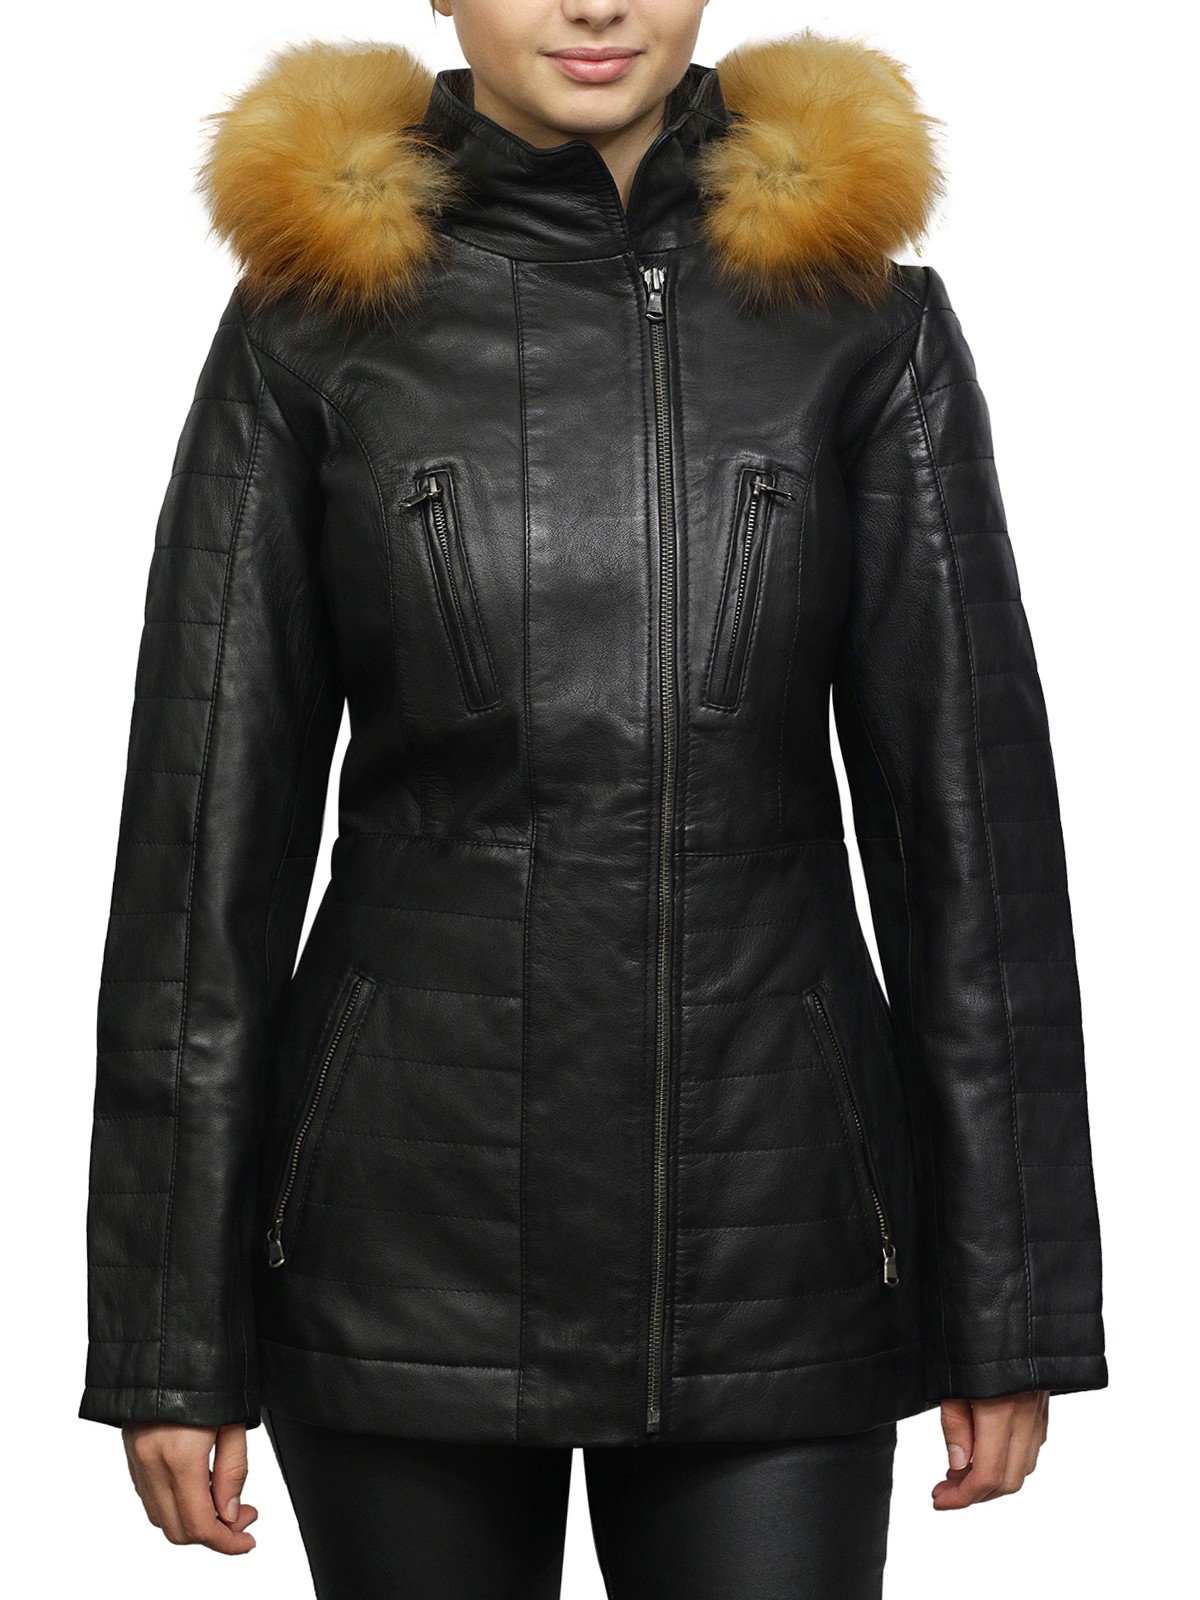 Women leather jackets, leather jackets for women, leather jackets, leather  coats